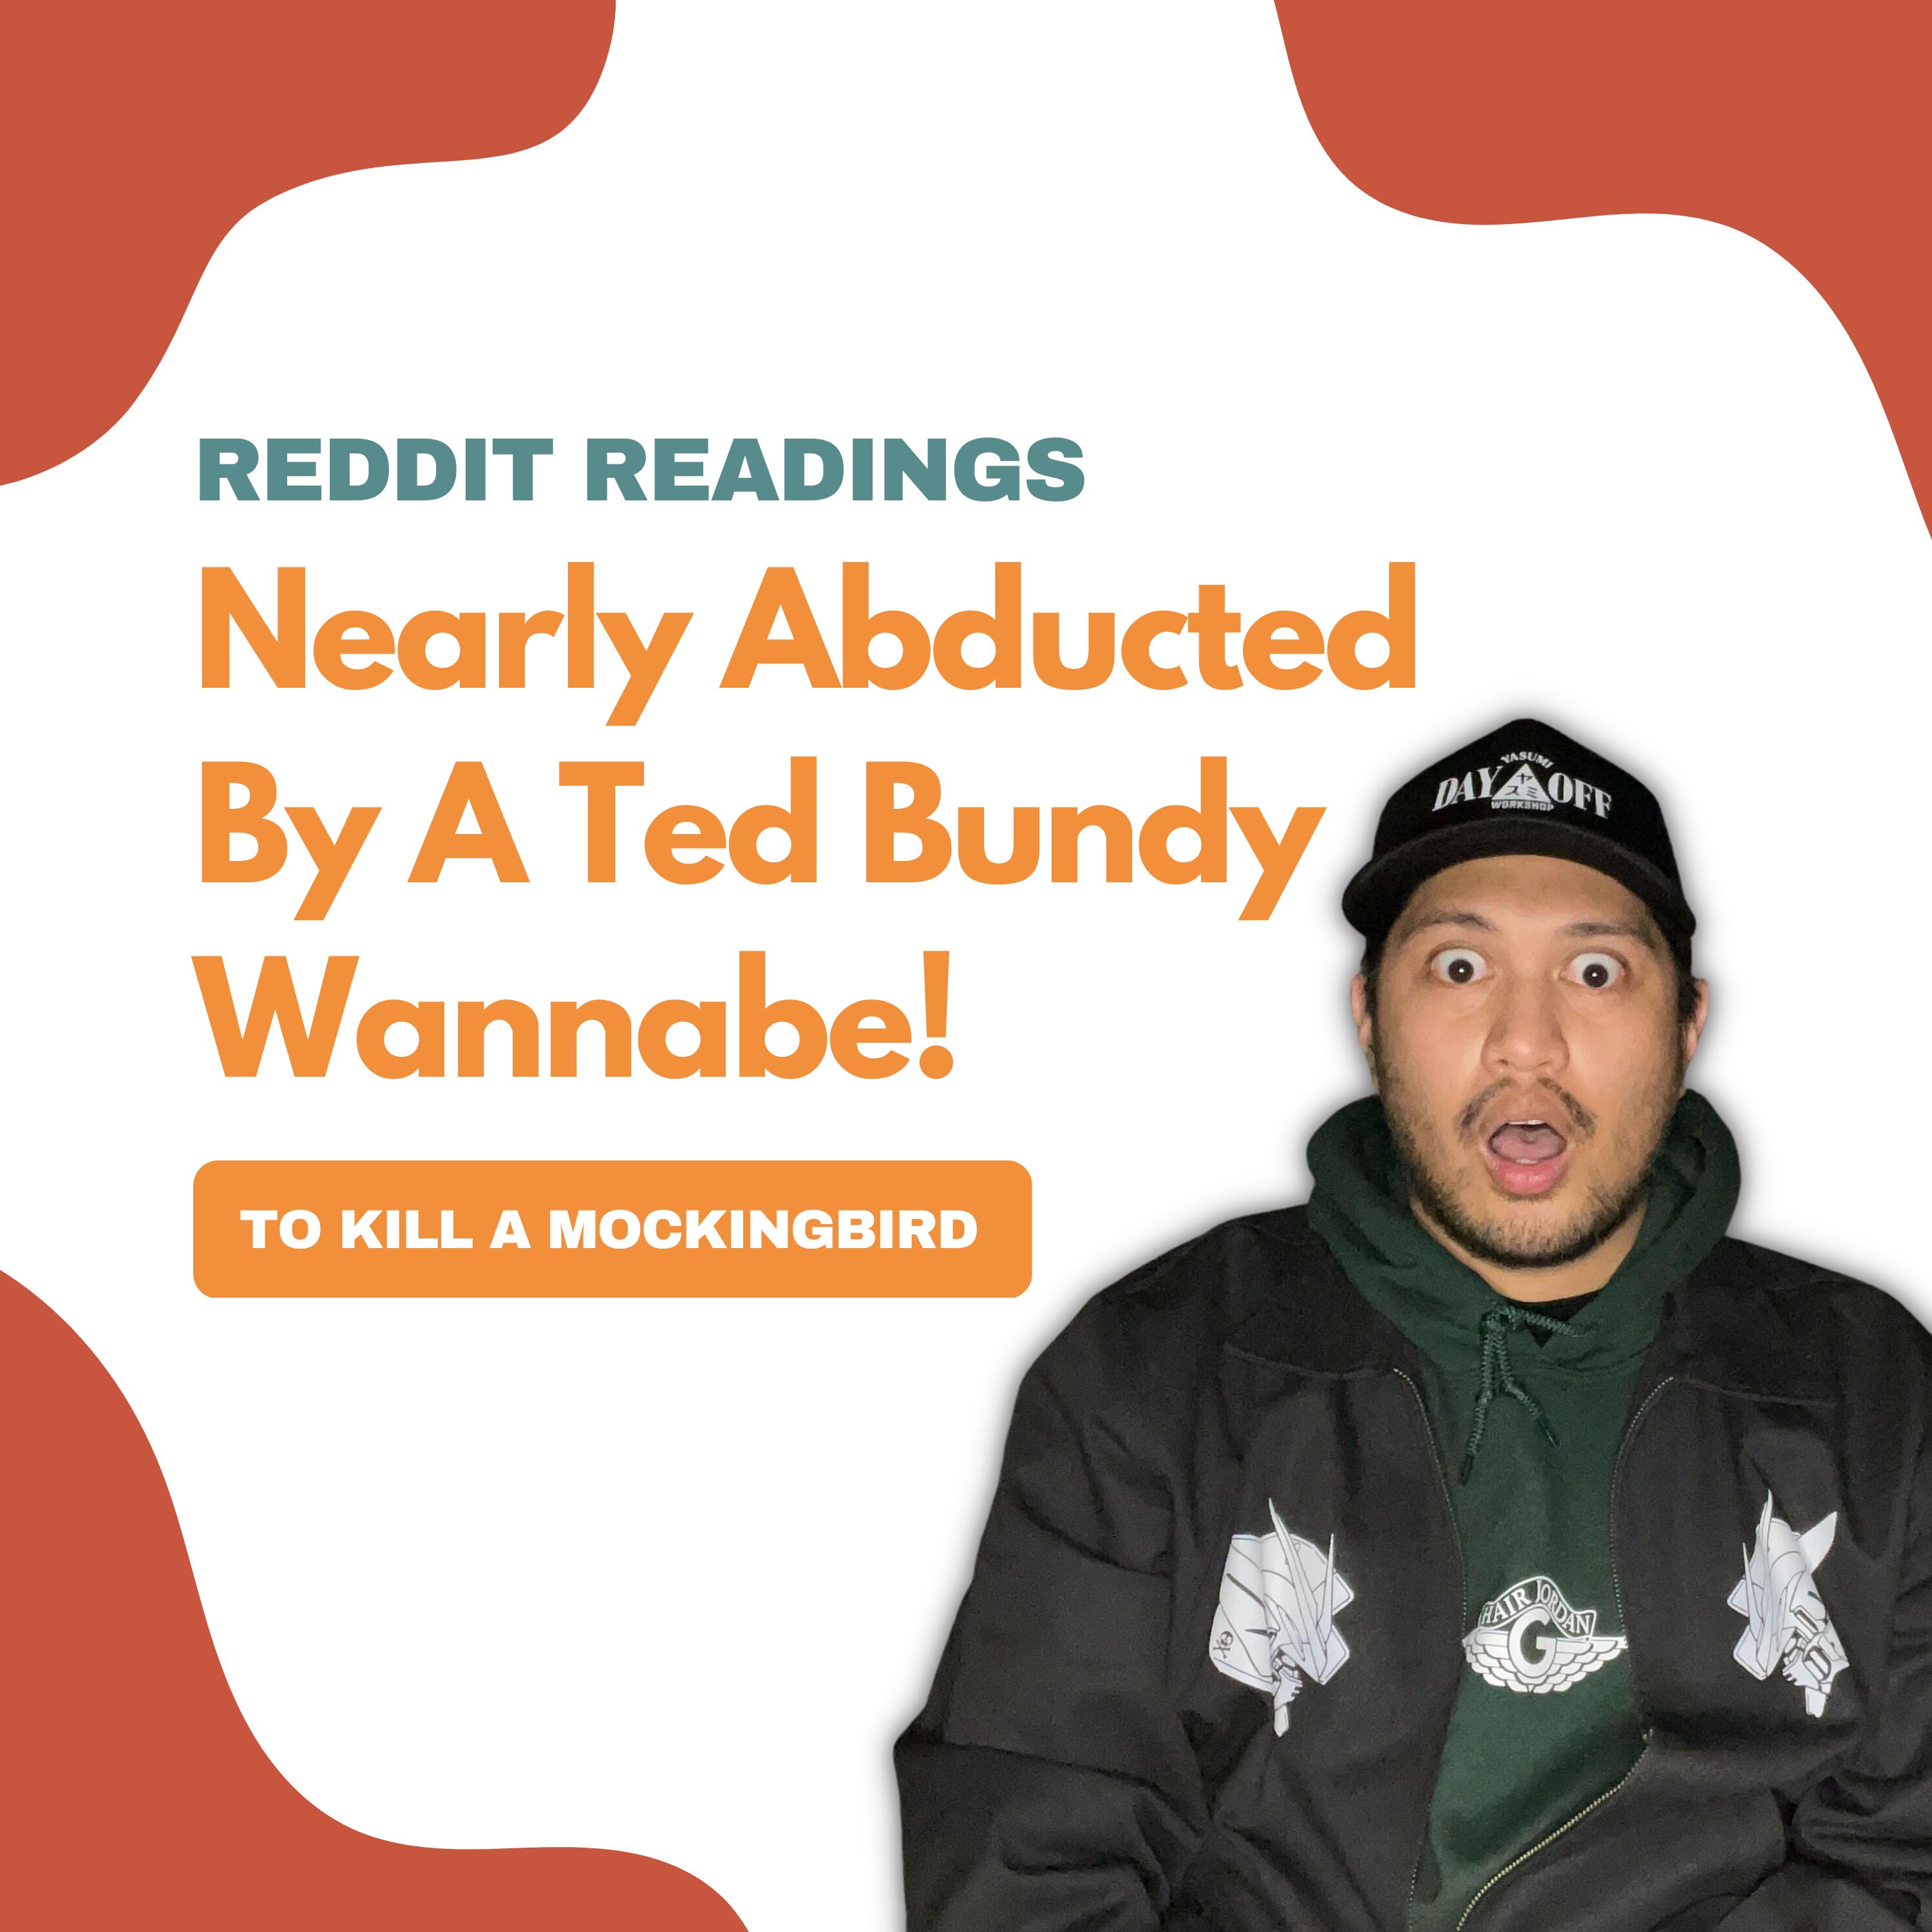 Reddit Readings | Nearly Abducted By A Ted Bundy Wannabe! Image